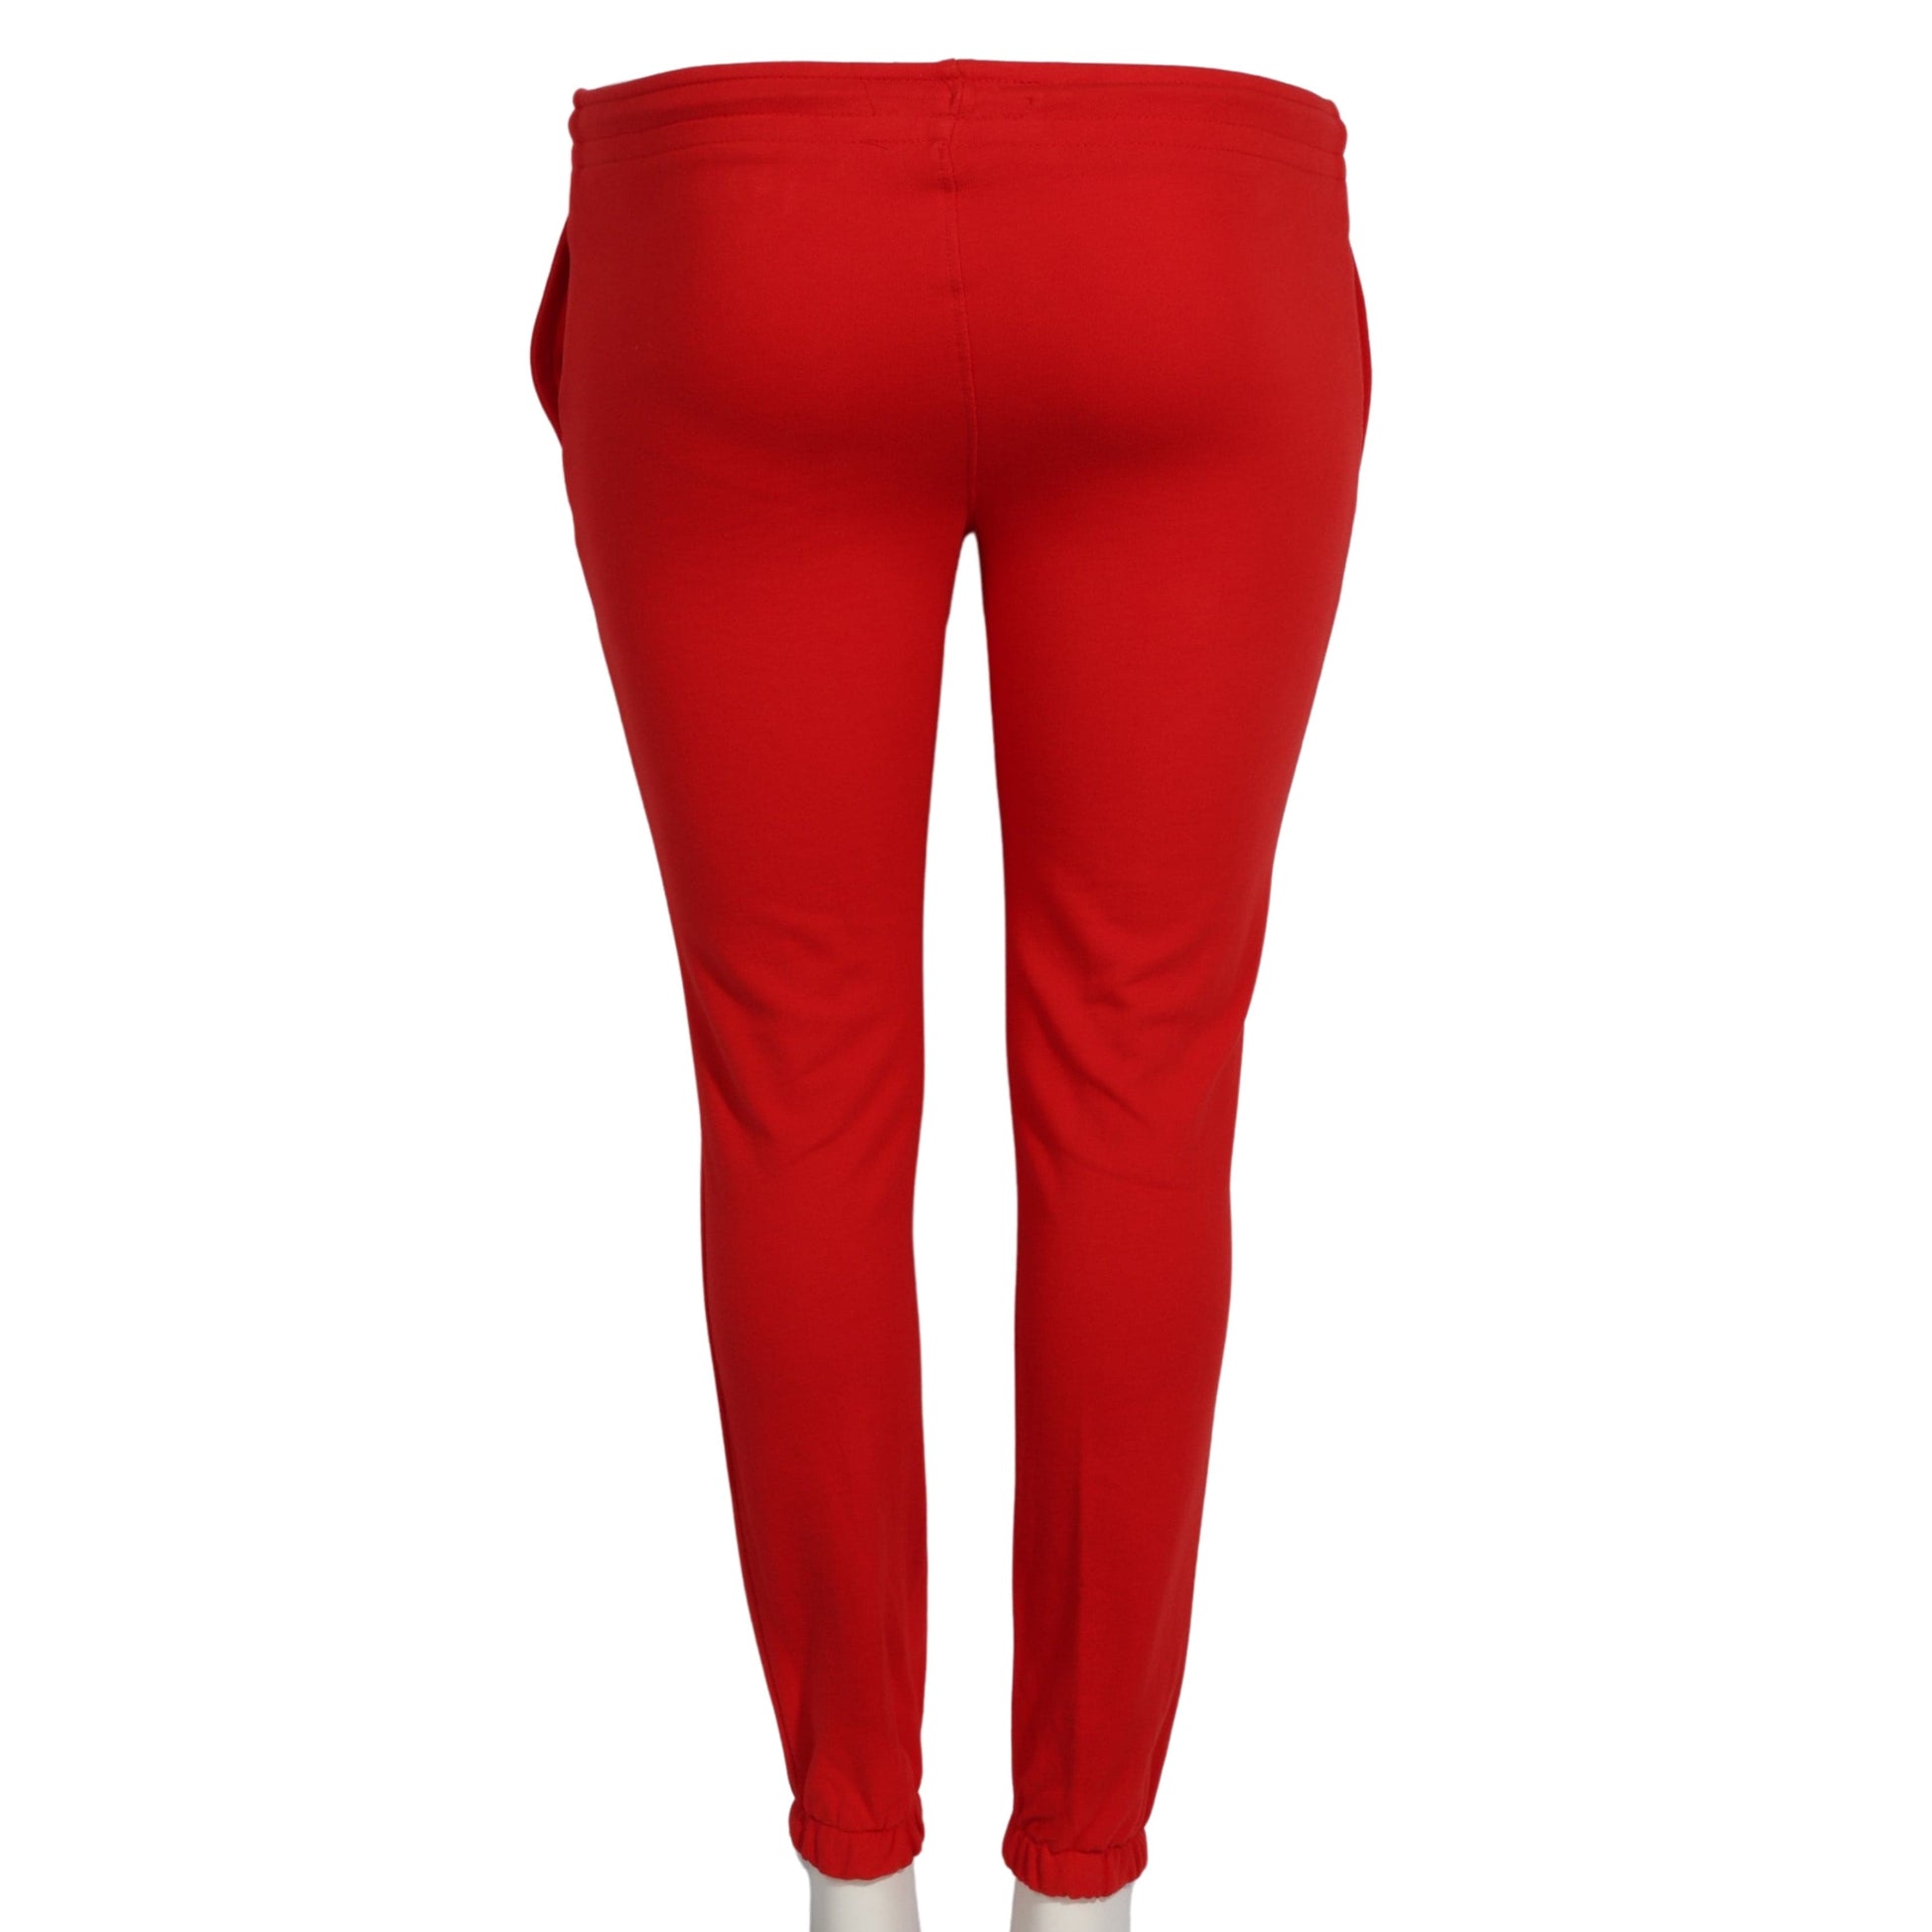 THEREABOUTS Womens Bottoms L / Red THEREABOUTS - Comfy Elastic Waist Sweatpants